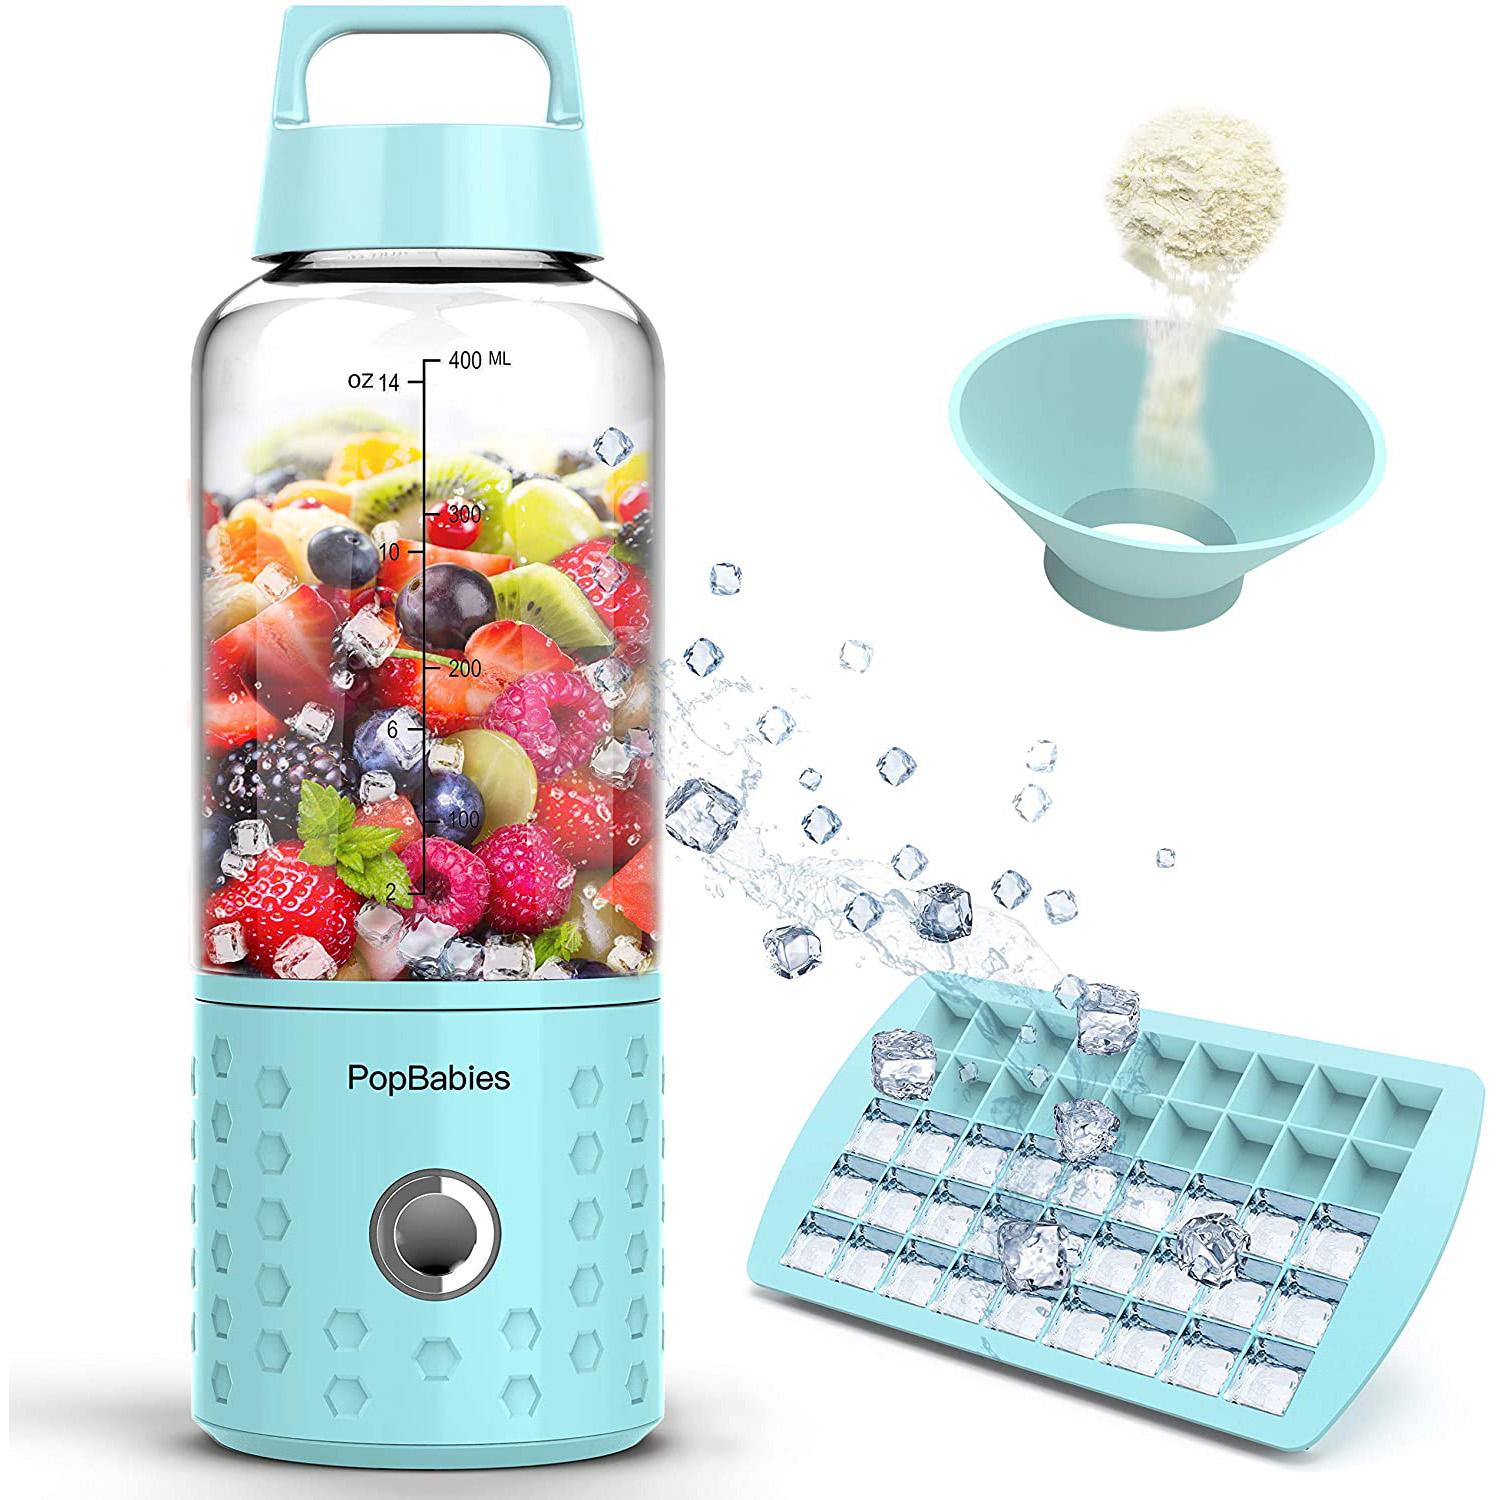 Portable PopBabies Blender for $25.89 Shipped